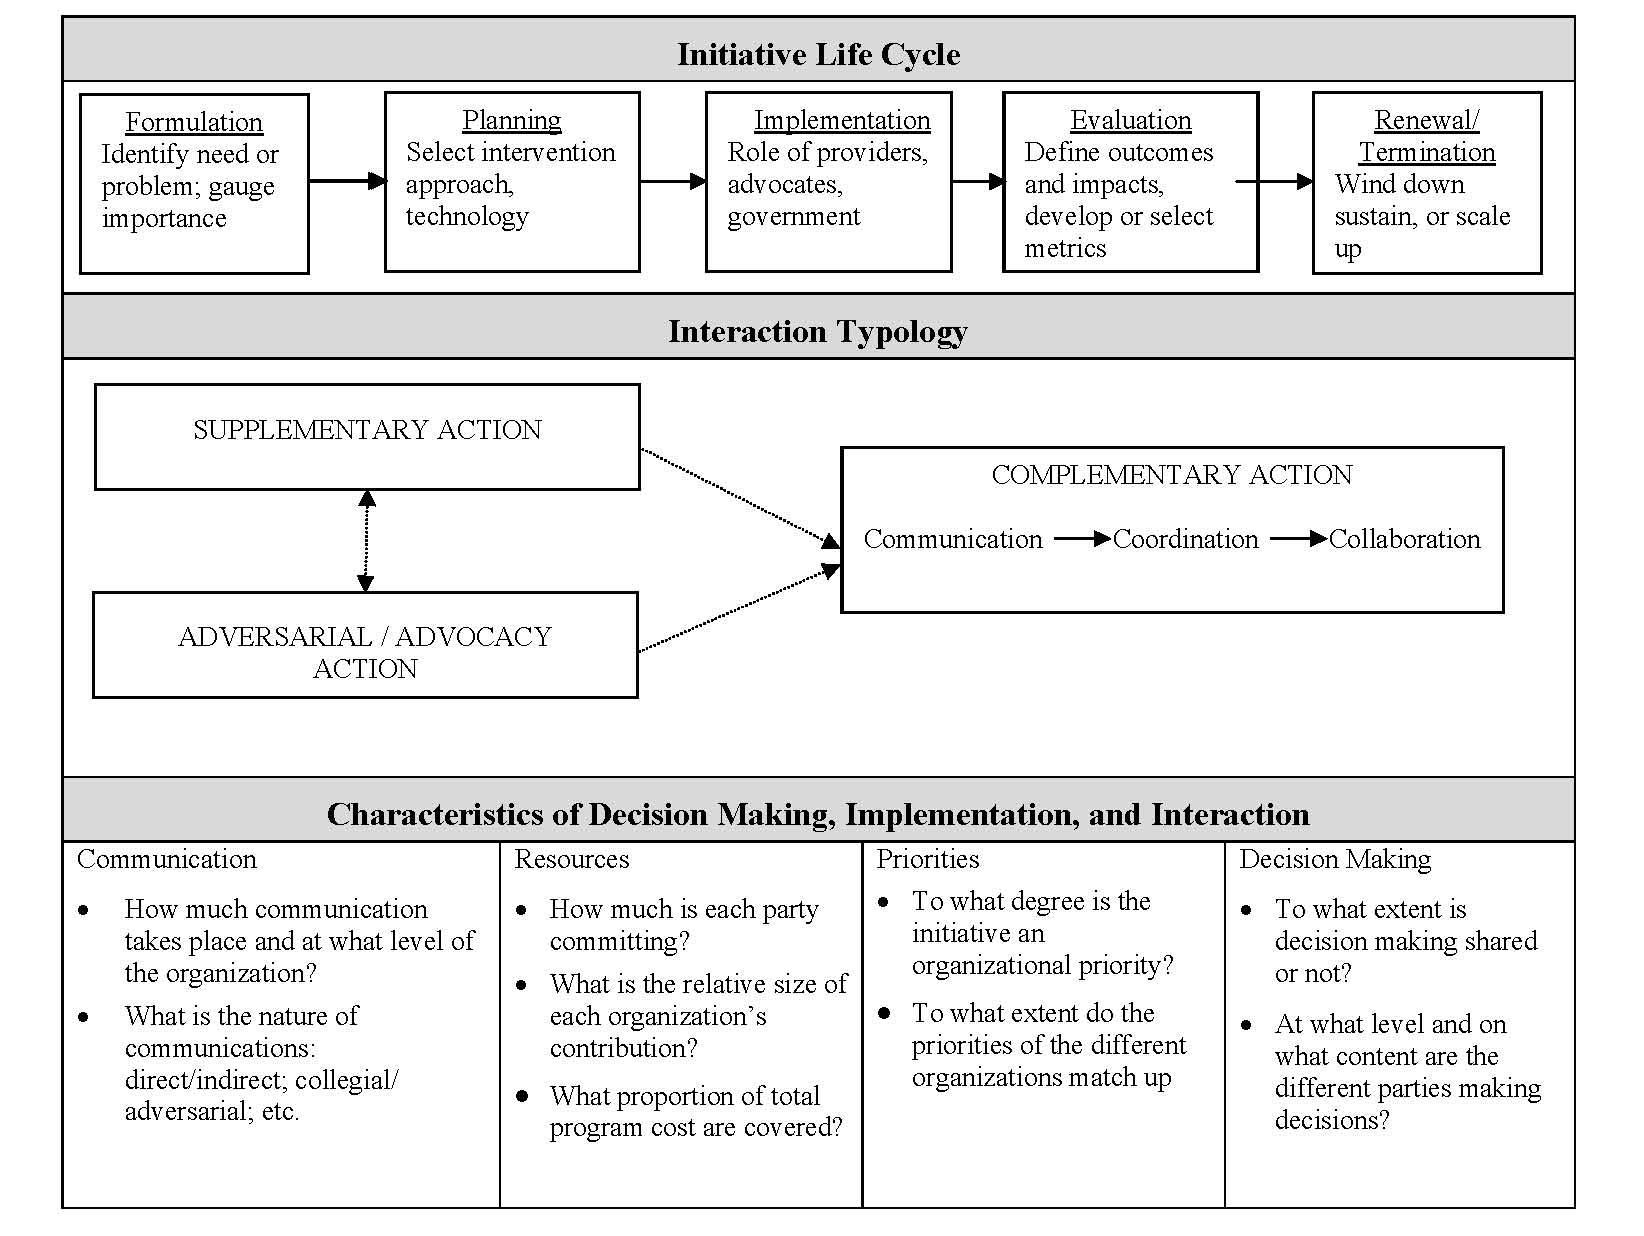 Conceptual Framework for USG-Foundation Decision Making, Implementation, and Interaction around Philanthropic Initiatives